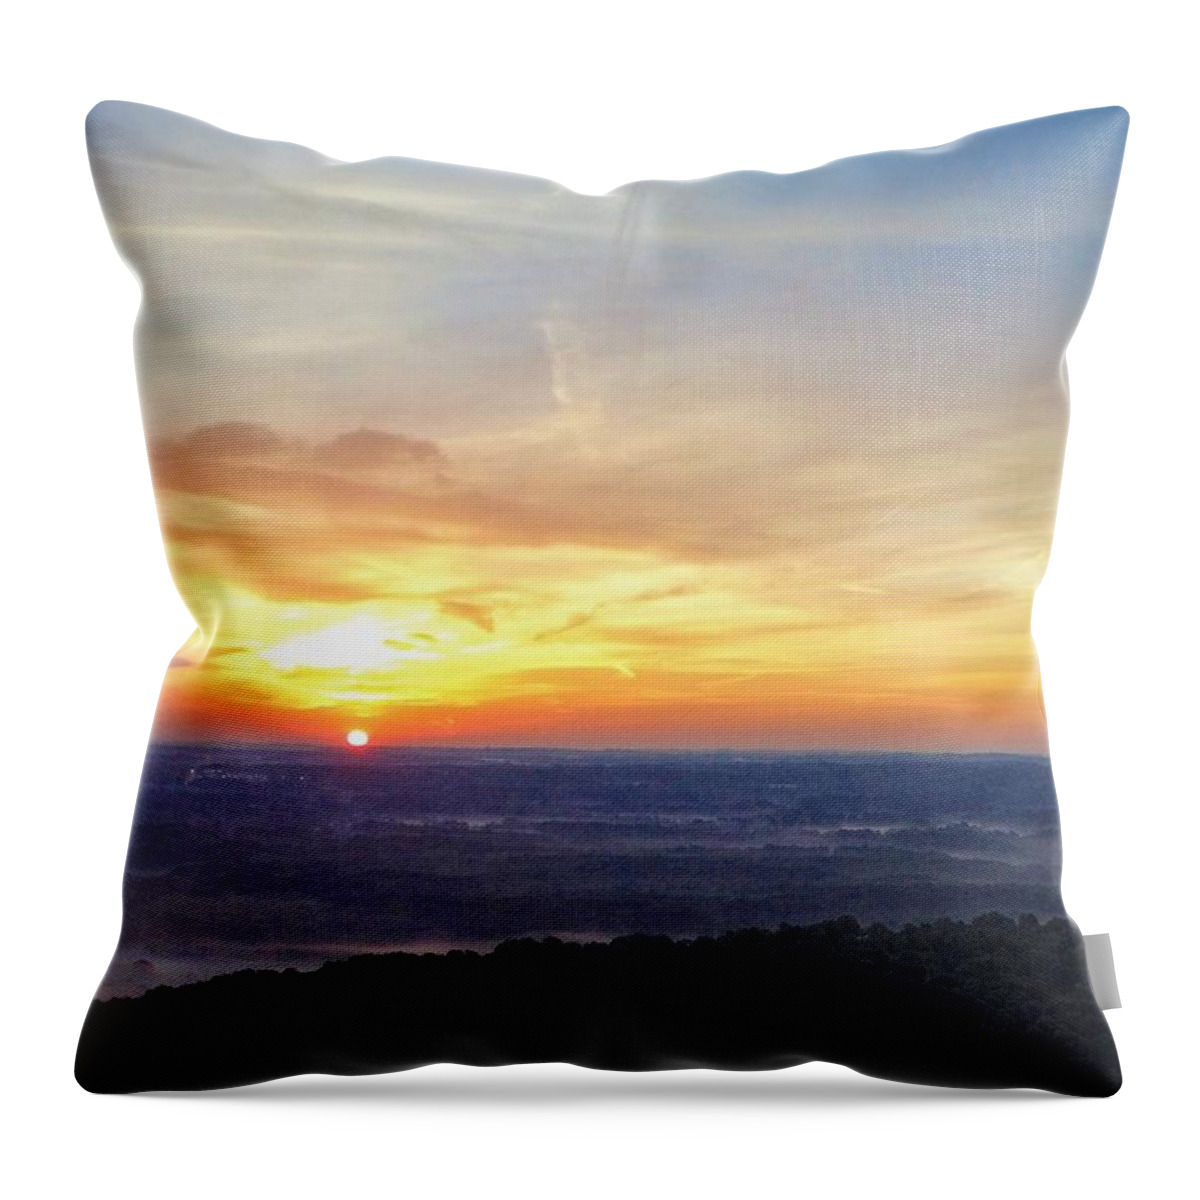  Throw Pillow featuring the photograph Liberty Park Sunrise by Brad Nellis